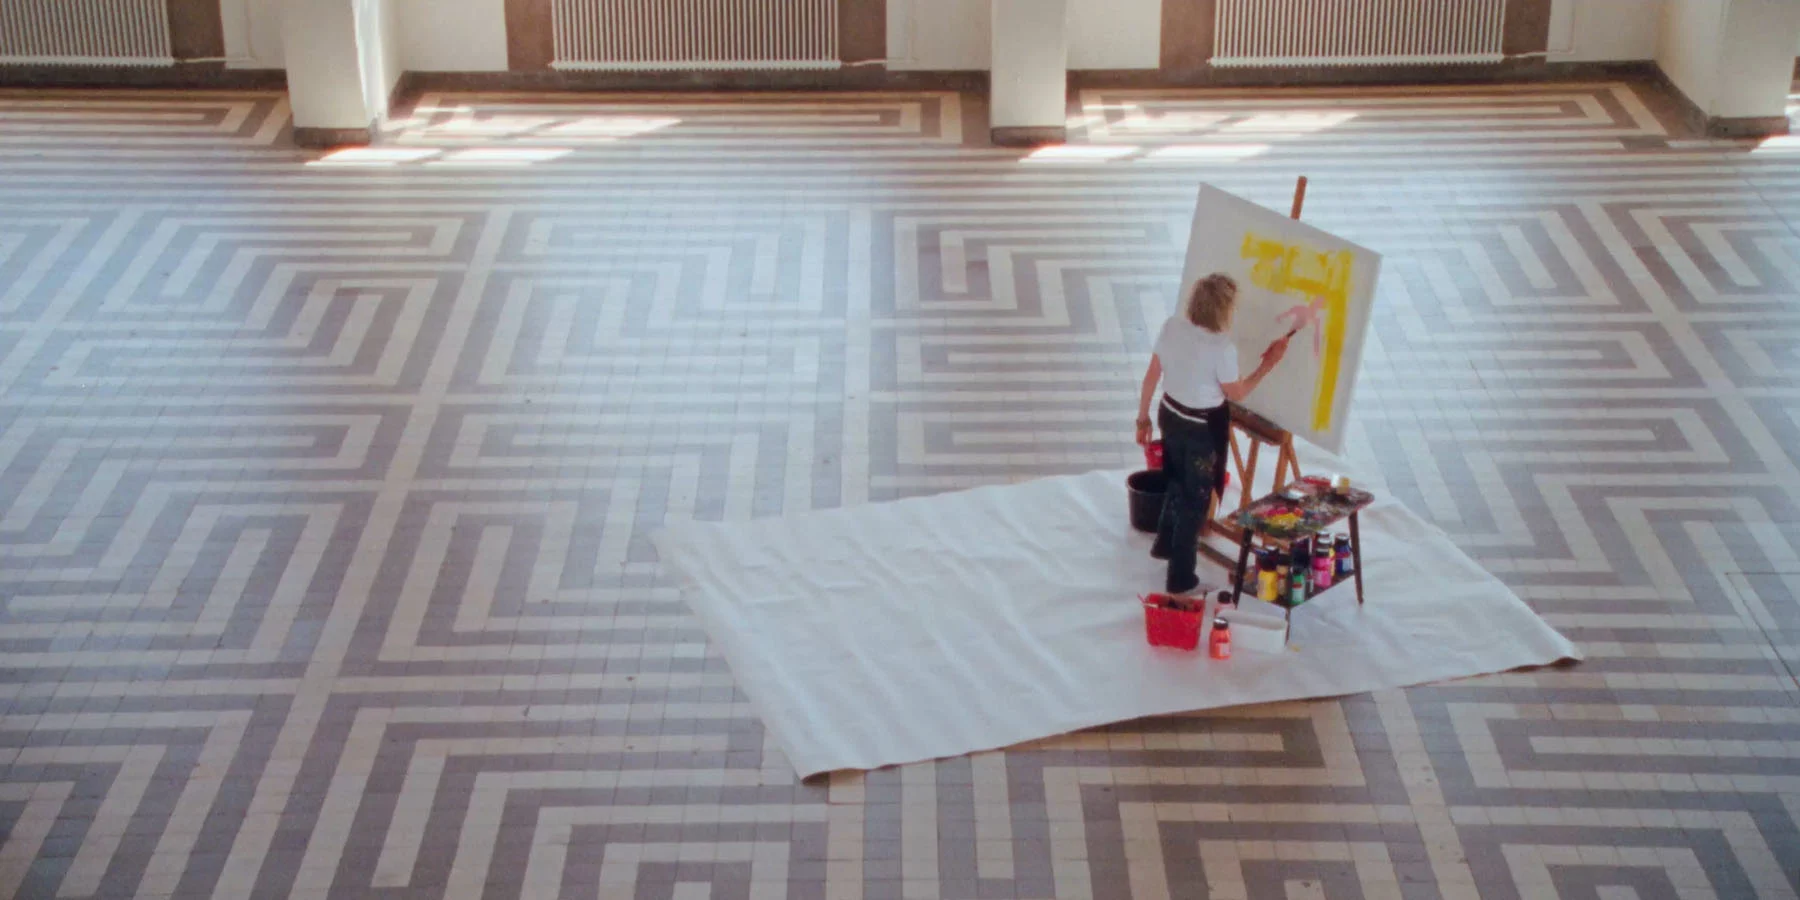 A short clip from the film “Hetty” showing artist Hetty van der Linden painting onto a blank canvas in the middle of an early 20th century brutalist building.  
